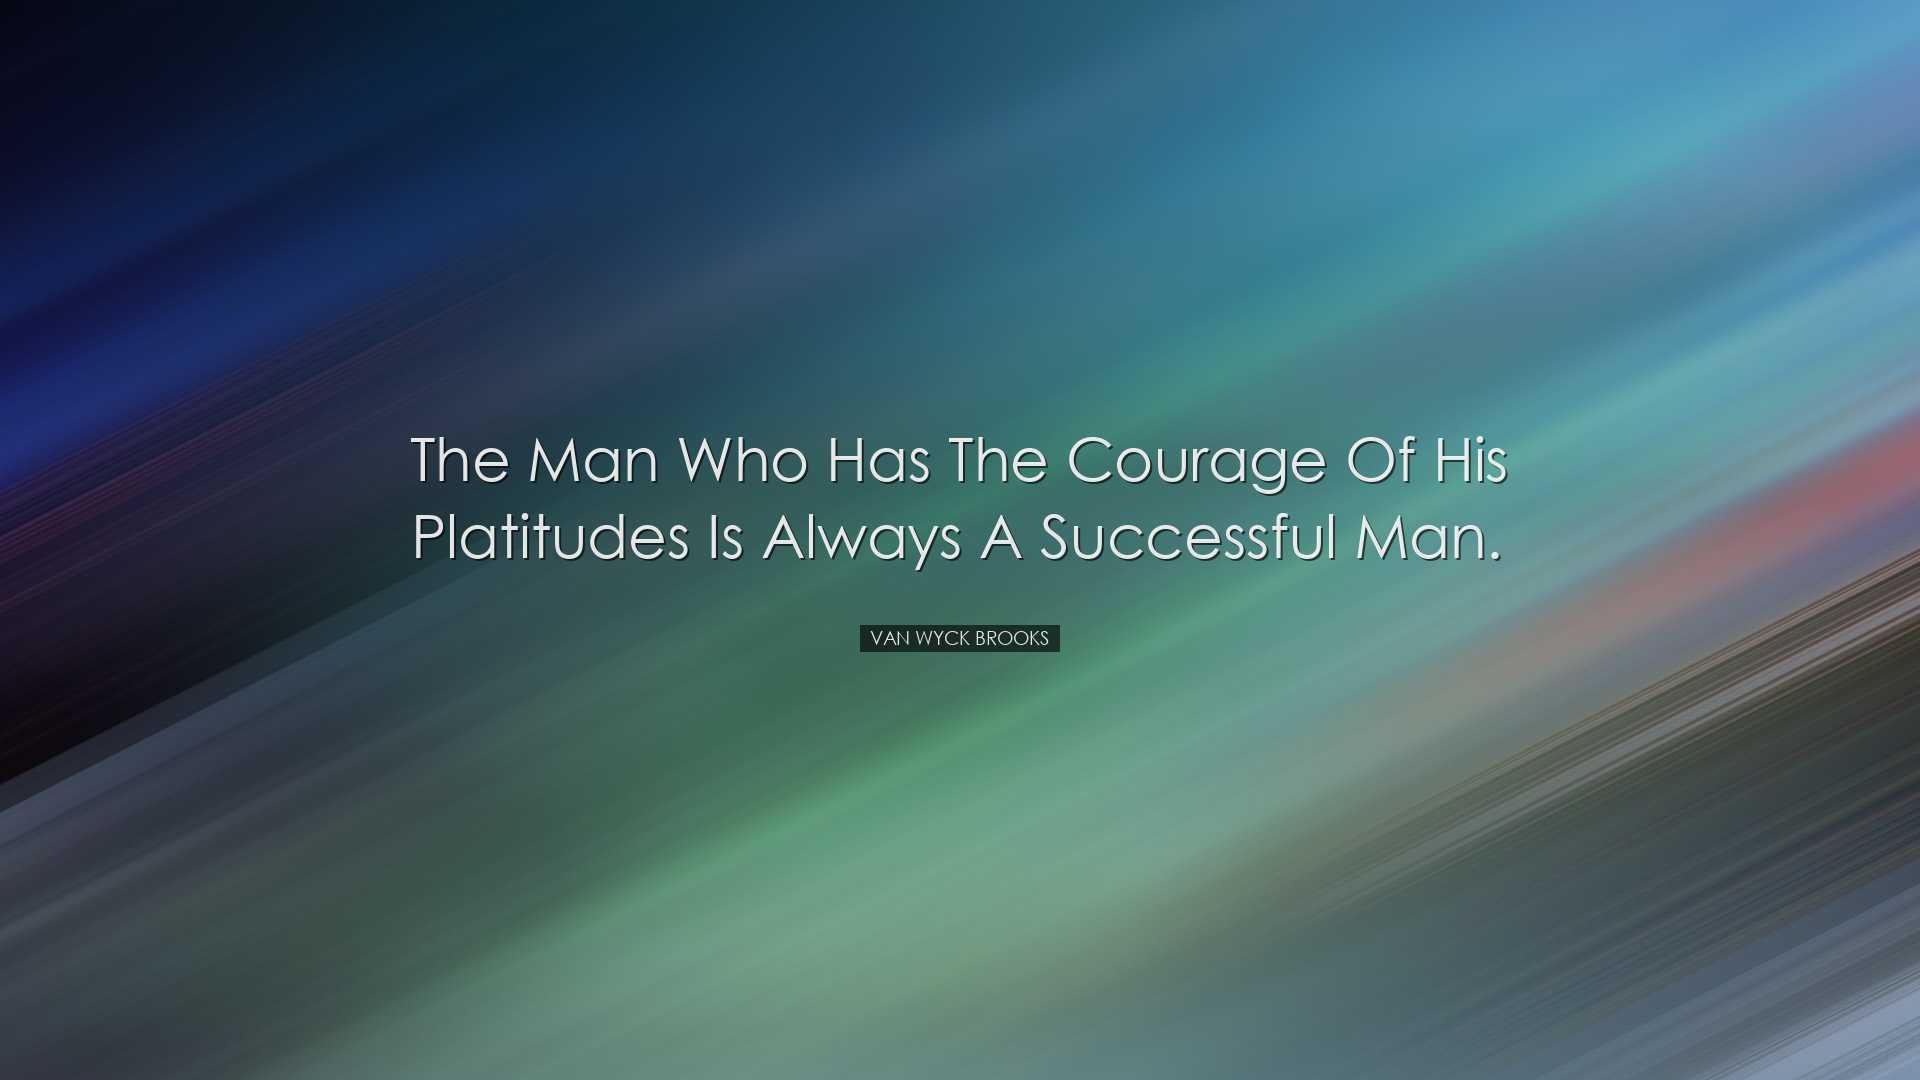 The man who has the courage of his platitudes is always a successf